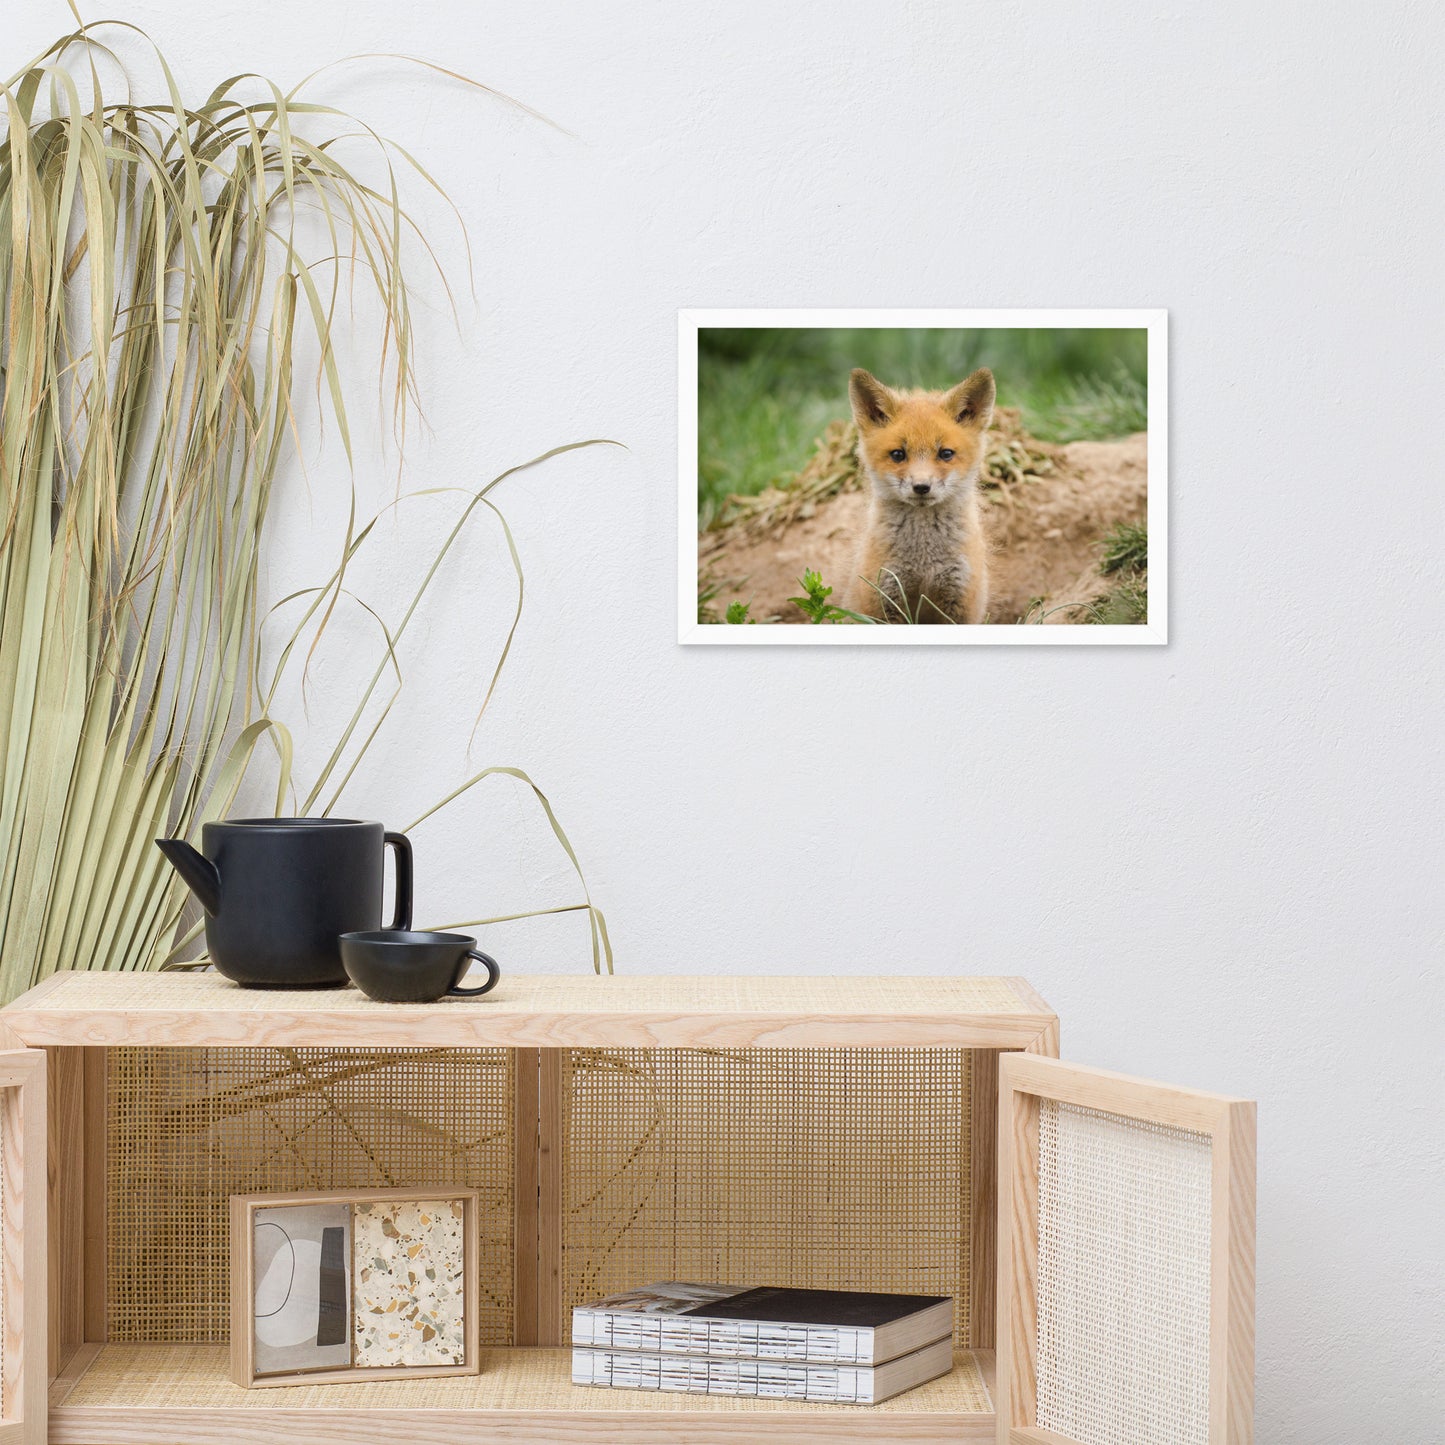 Wall Art Pictures For Bathroom: Baby Young Red Fox Kit/ Animal / Wildlife / Nature Photographic Artwork - Framed Artwork - Wall Decor